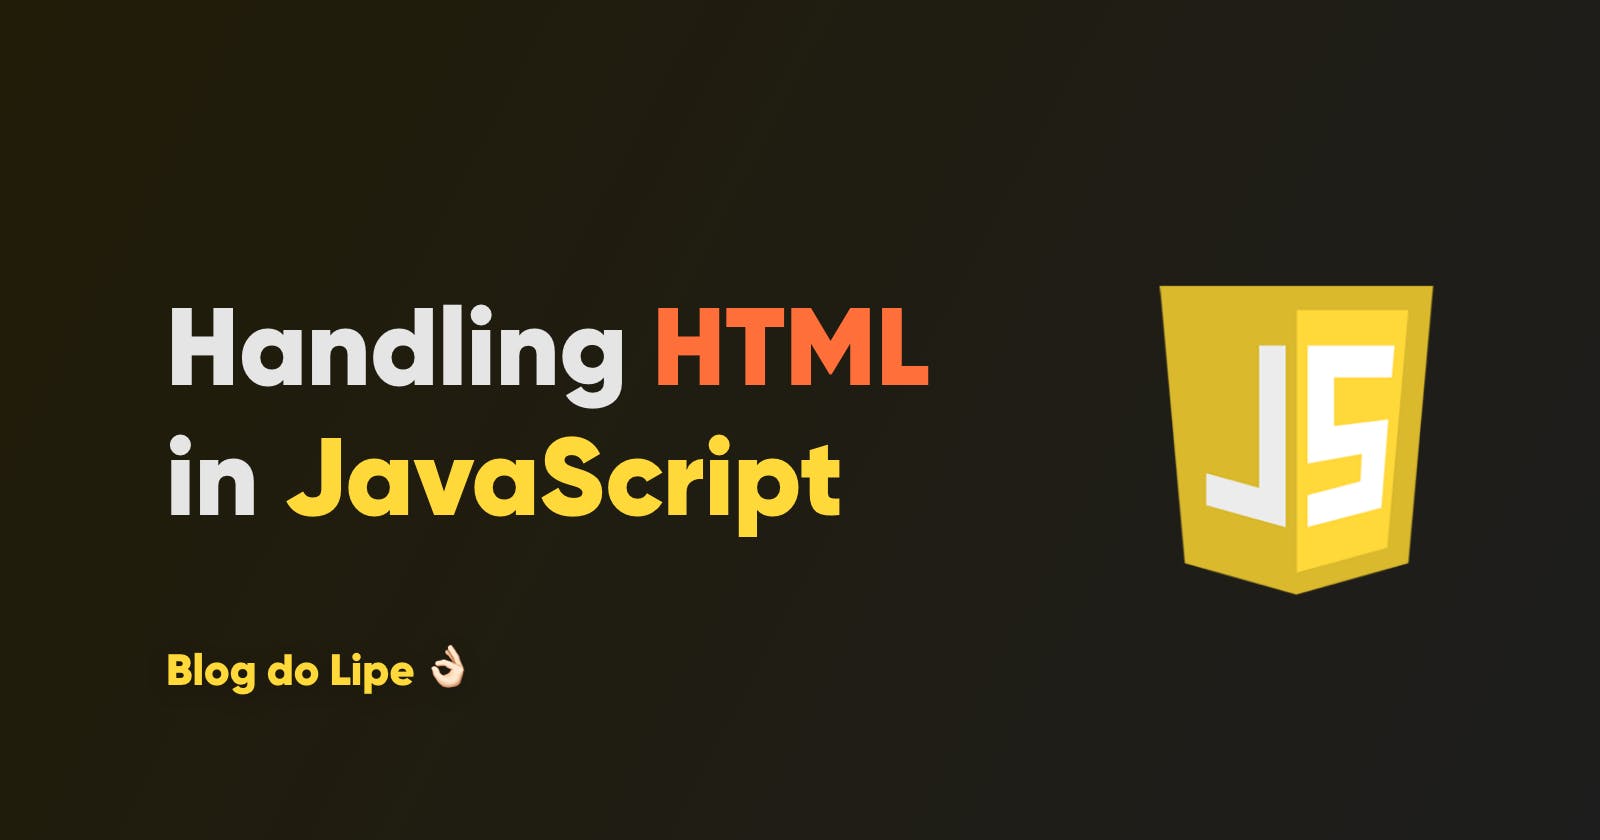 A simple guide to handle HTML in JavaScript